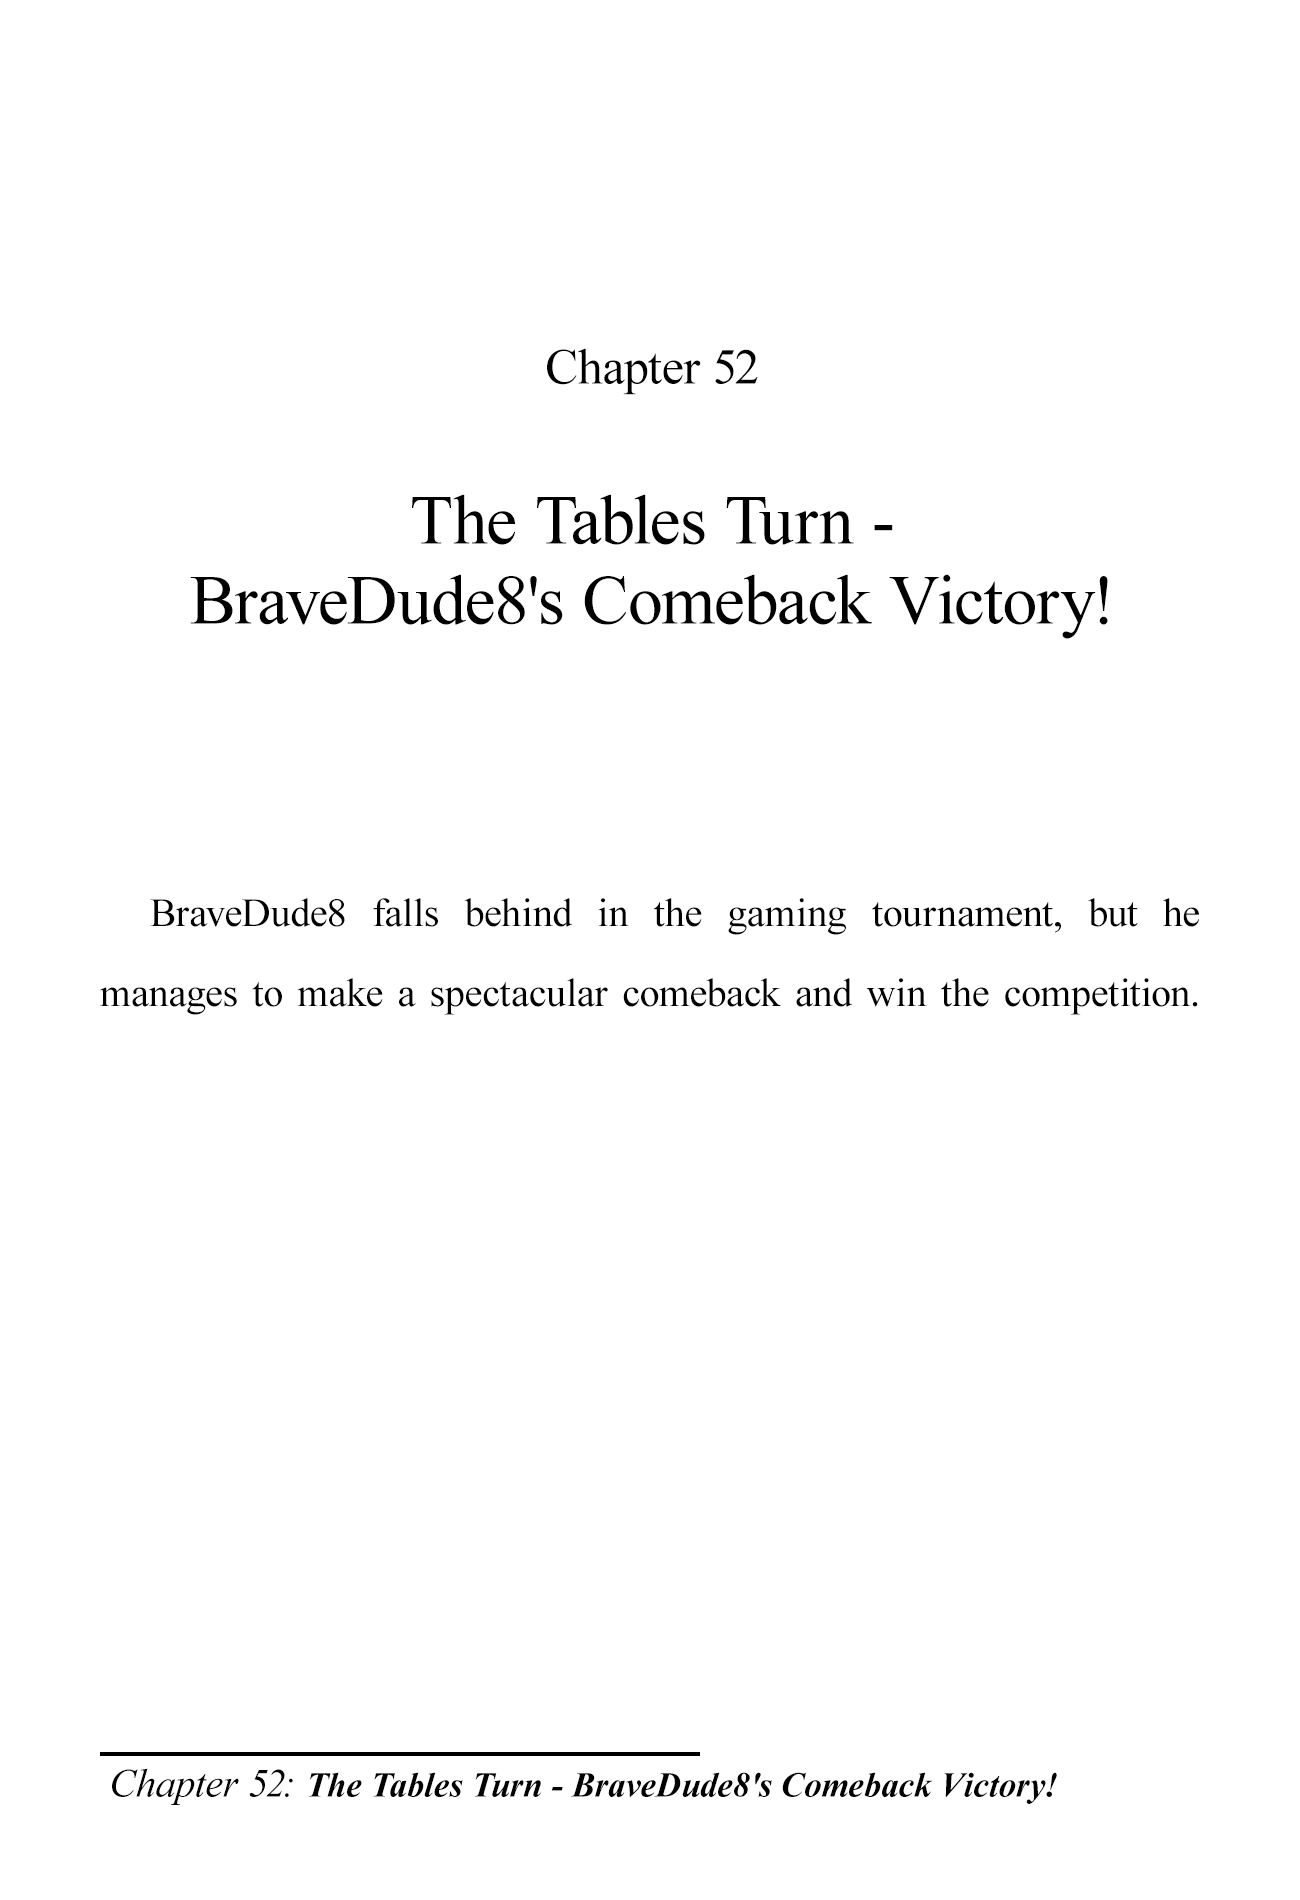 The Brave-Tuber Vol.2 Chapter 52: The Tables Turn - Bravedude8's Comeback Victory! - Picture 1